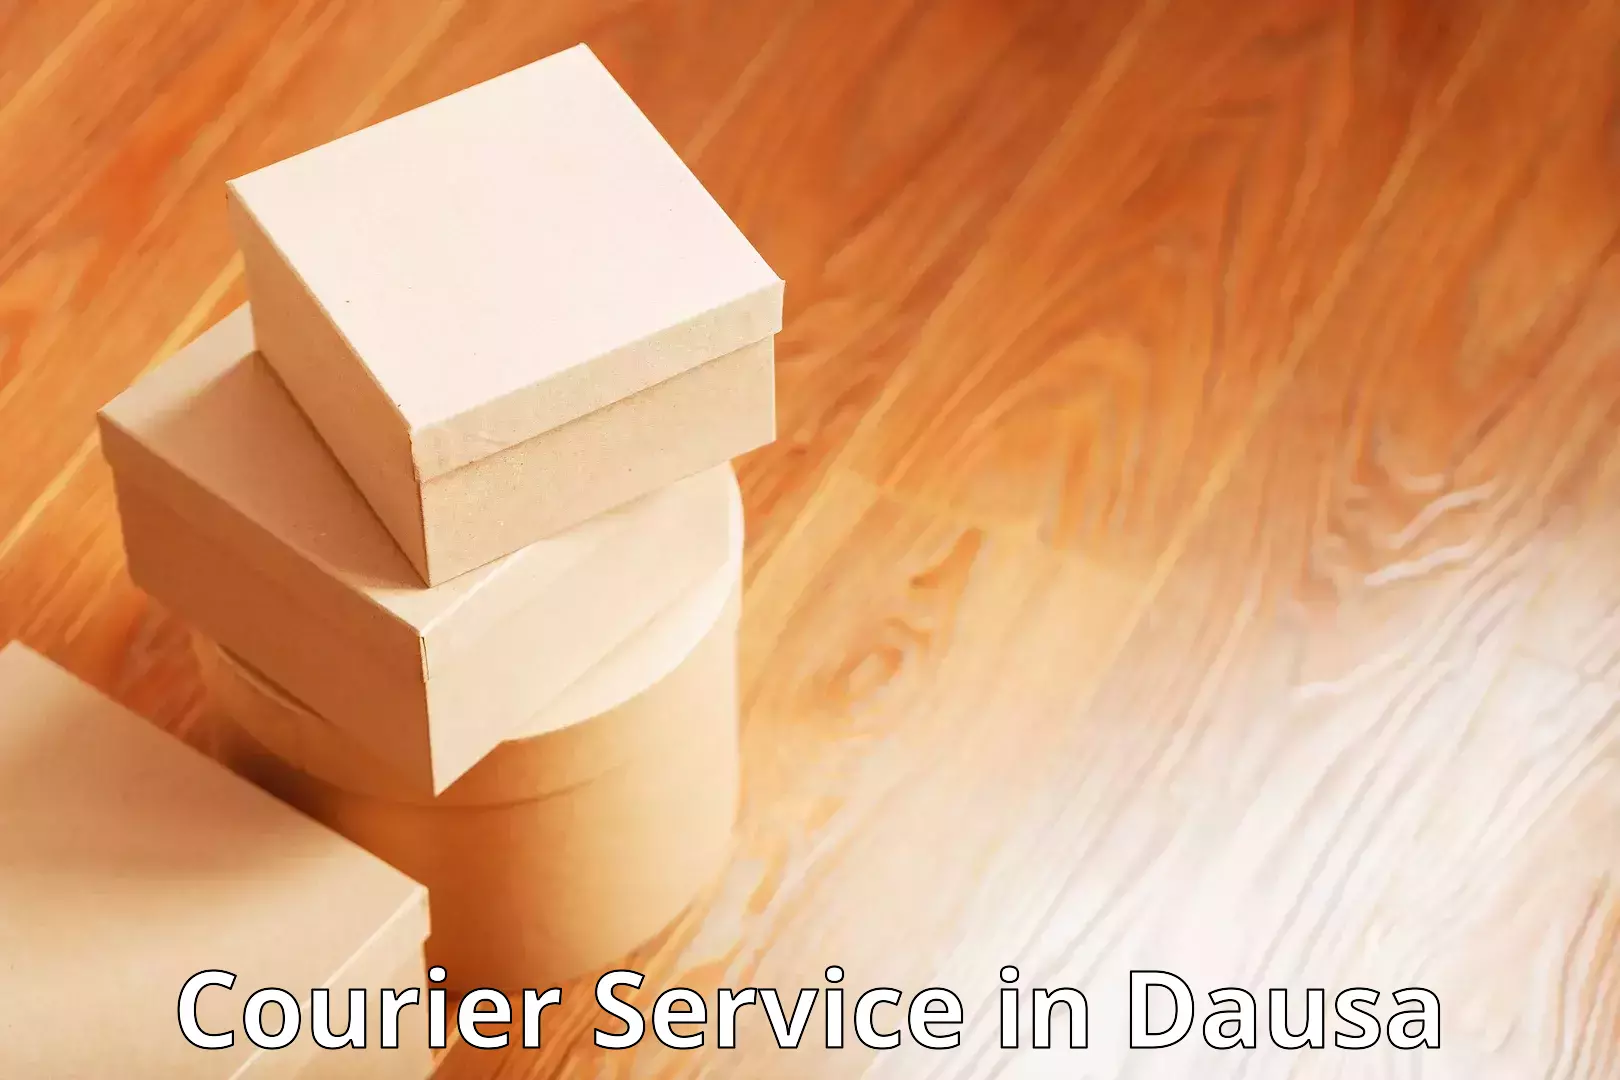 Fast parcel dispatch in Dausa